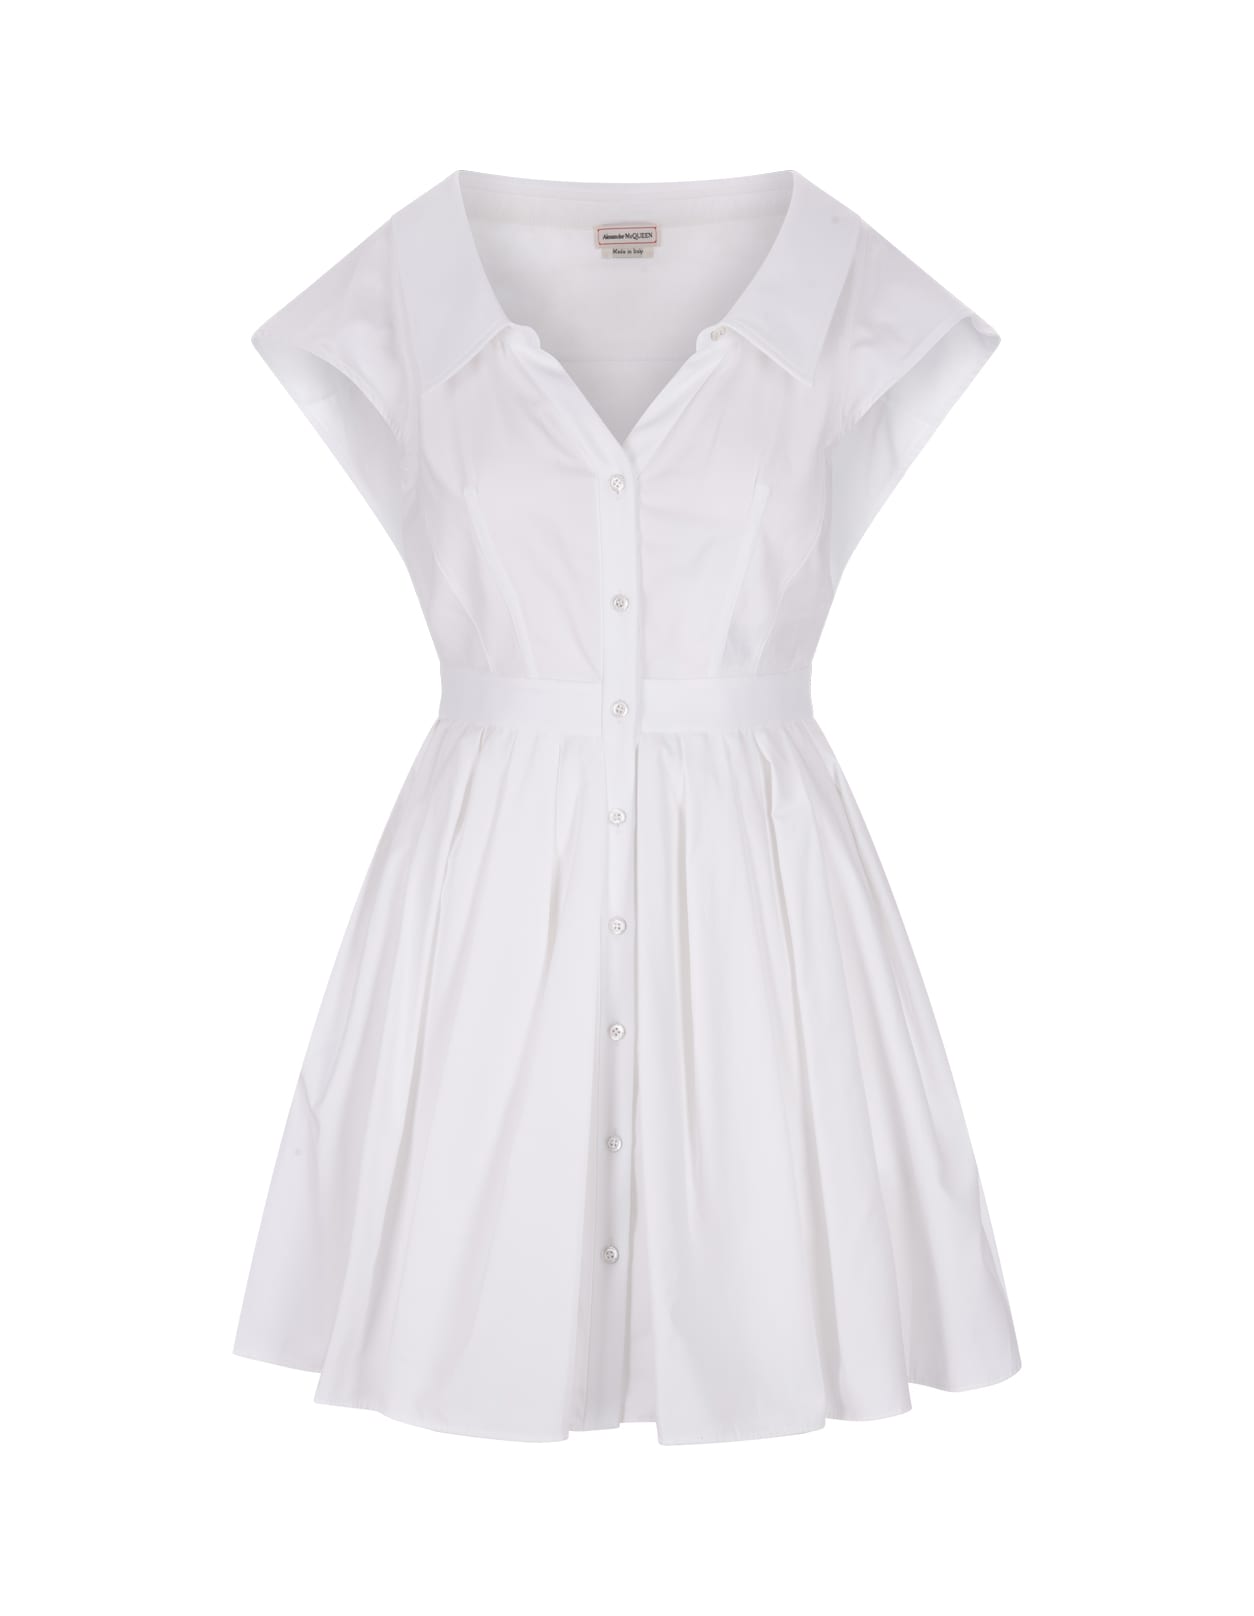 ALEXANDER MCQUEEN WHITE SHIRT MINI DRESS WITH WING SLEEVES